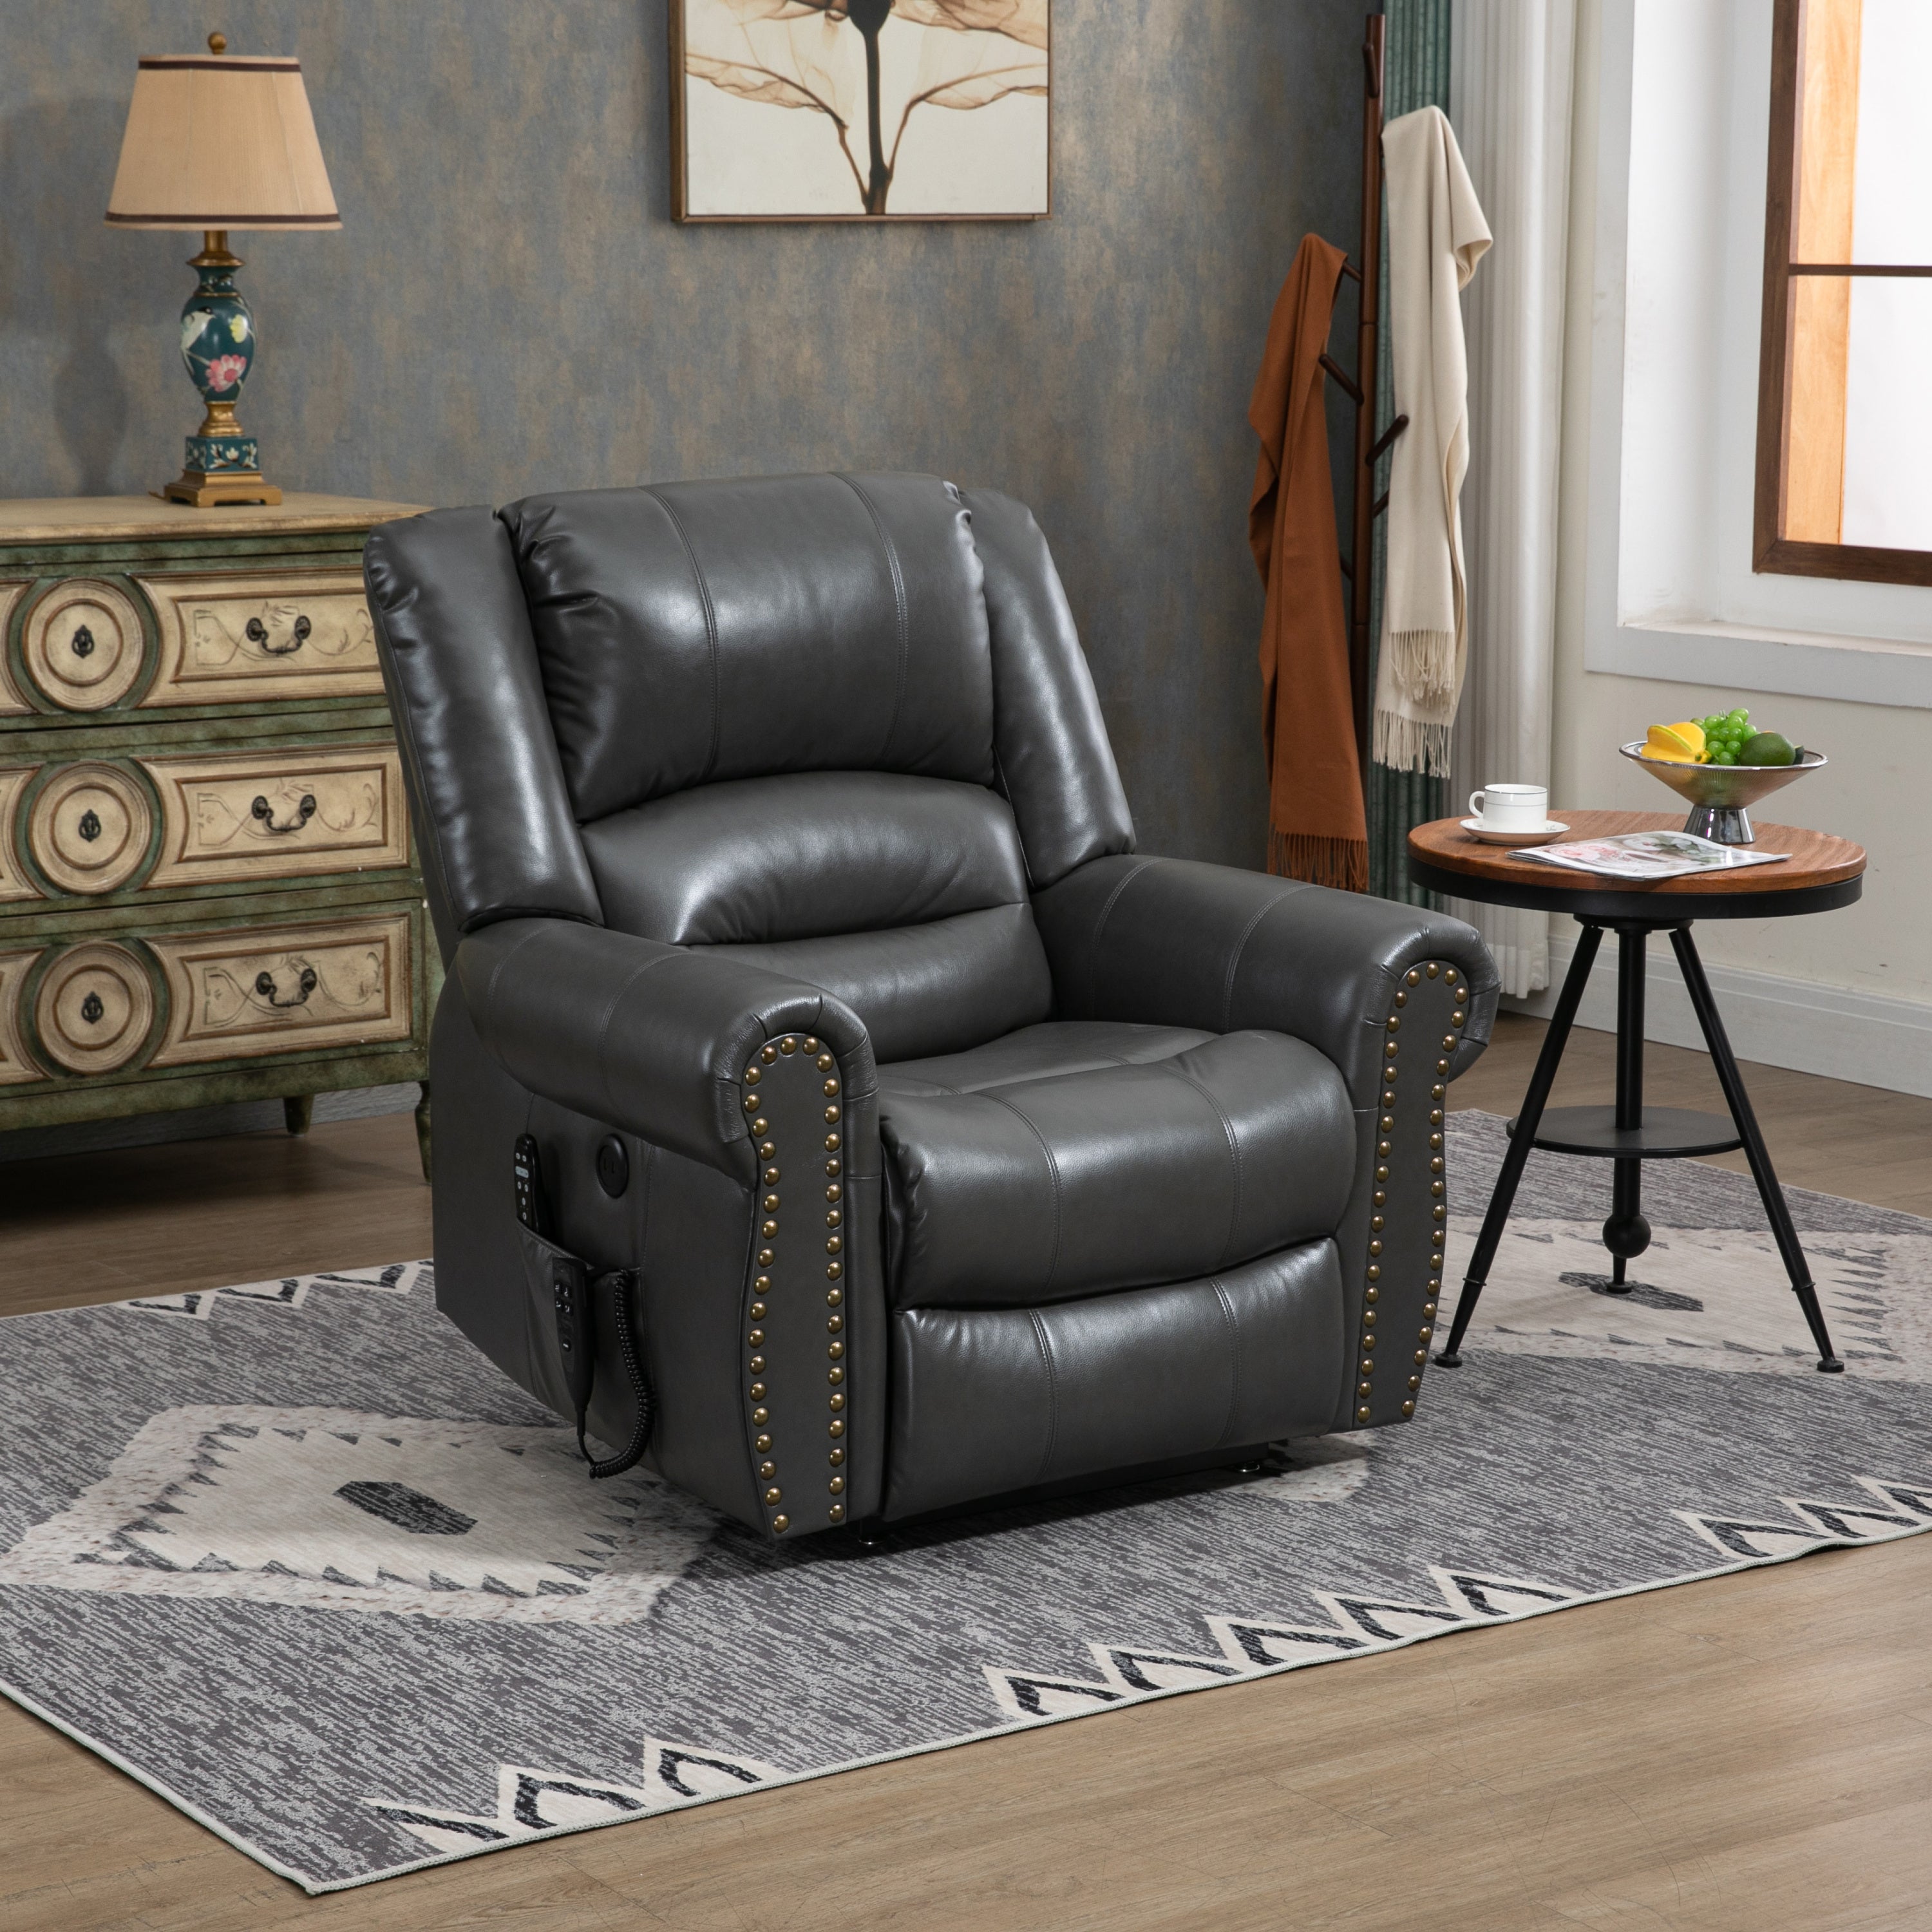 Grey Power Lift Recliner Chair with Heat, Massage, and Infinite Positioning